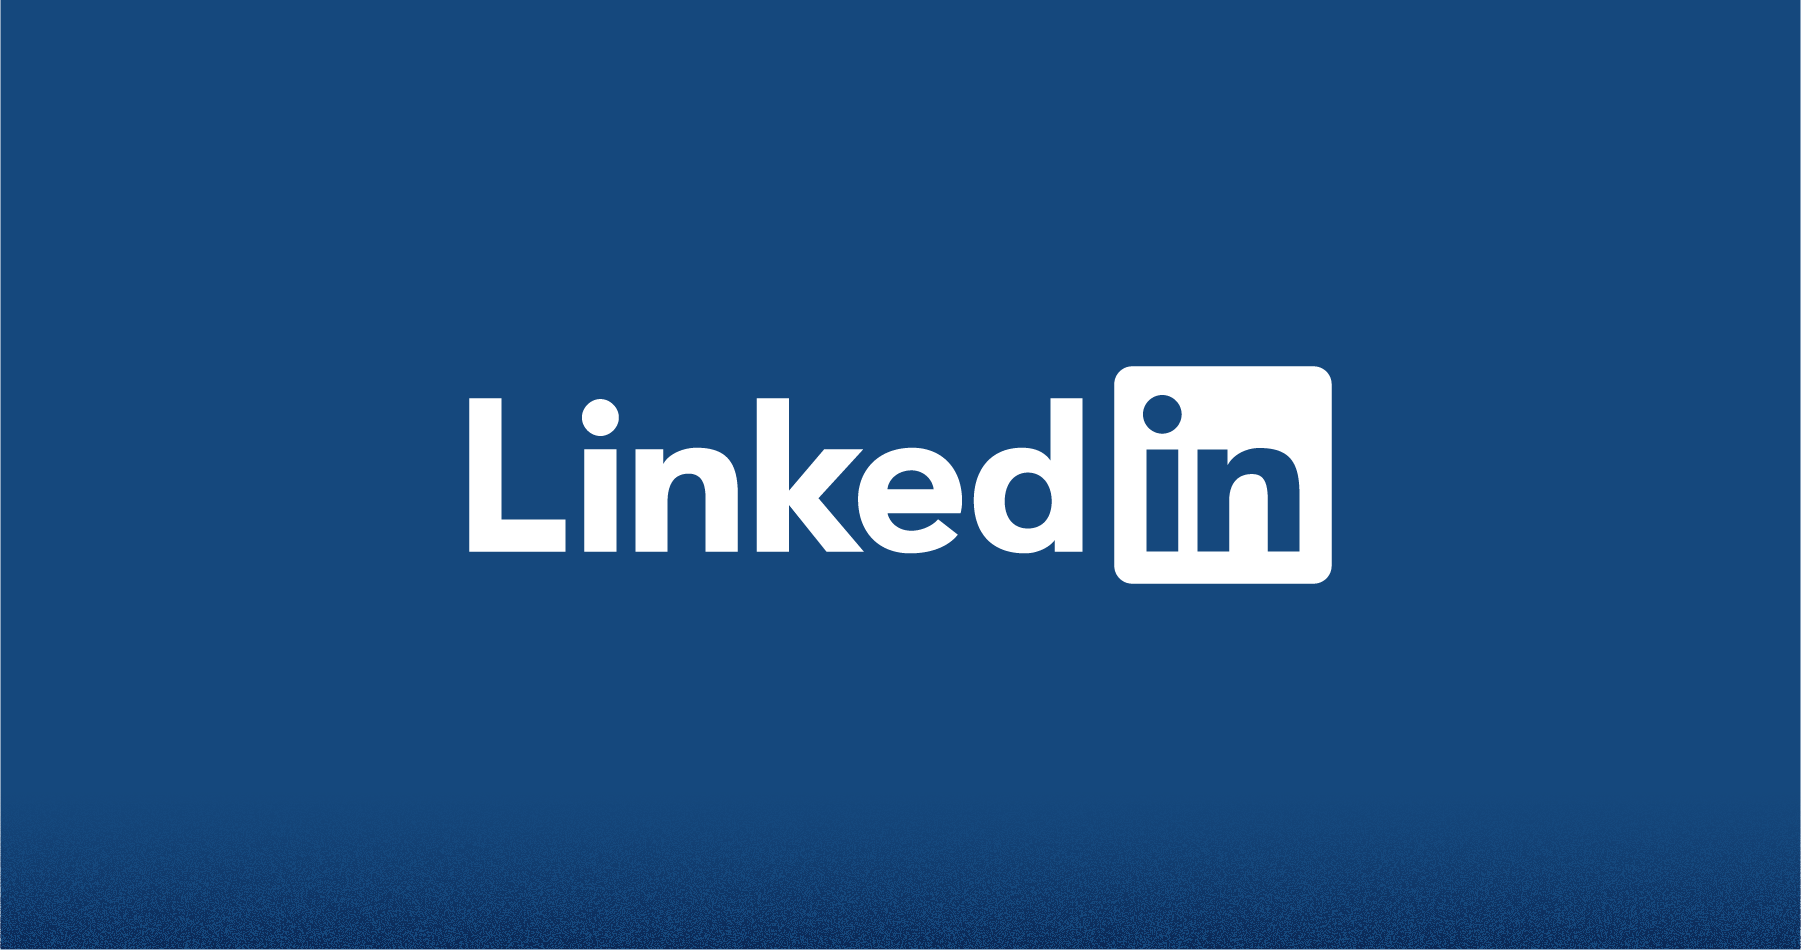 LinkedIn introduced new tools as number of followers increased